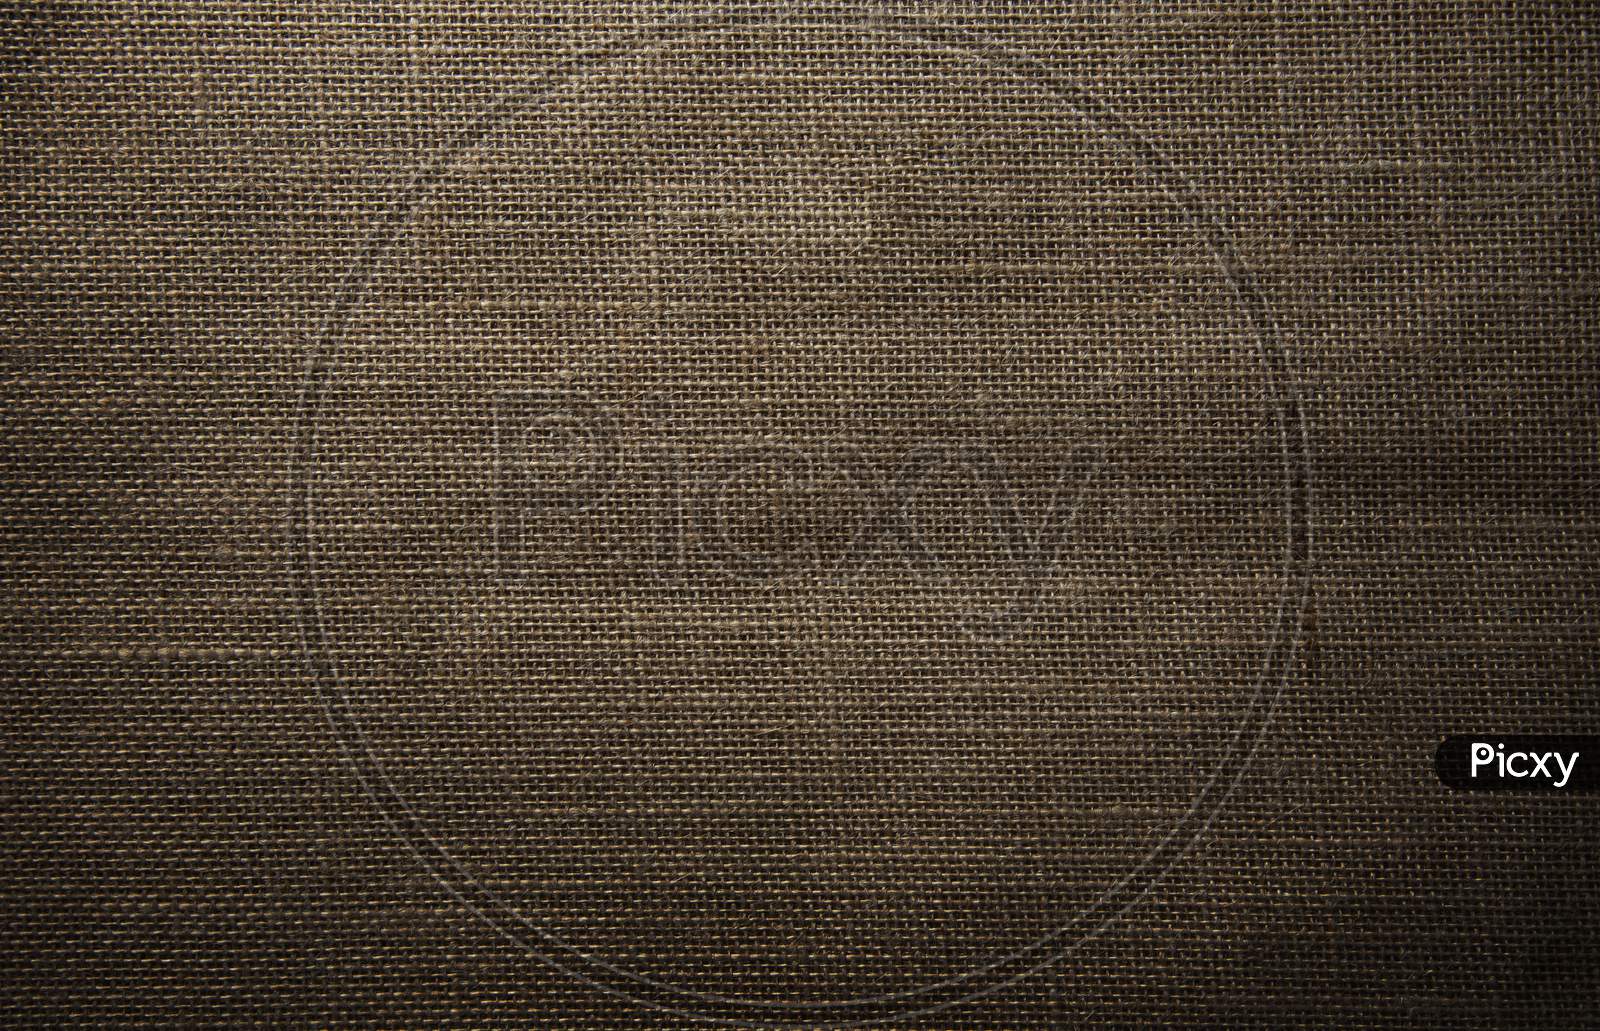 jute hessian sackcloth canvas cloth with woven textures